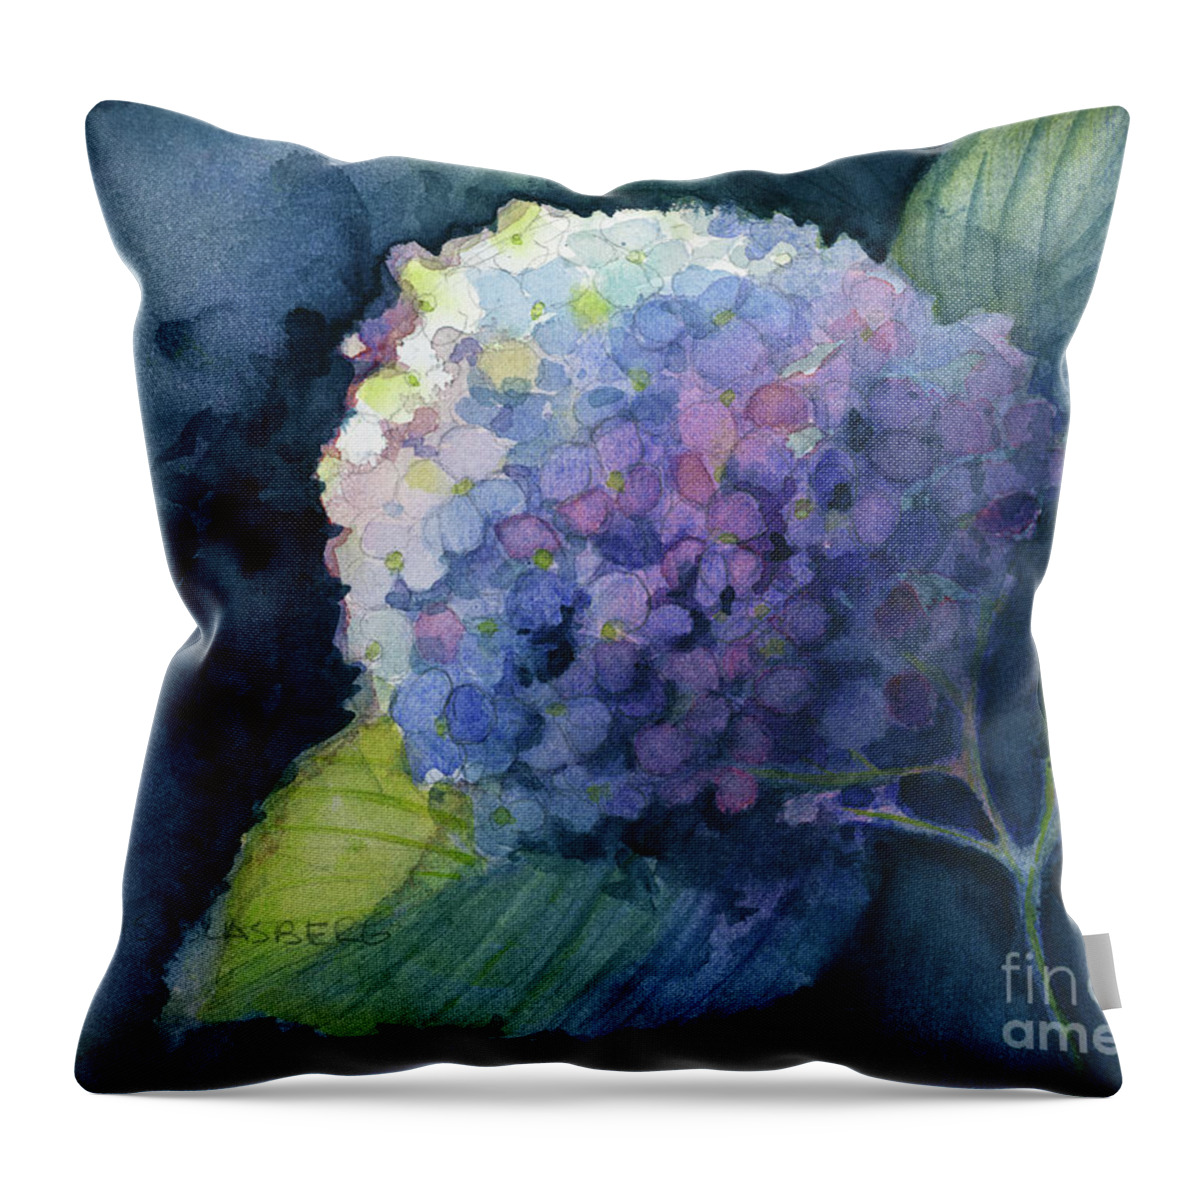 #originalfineart #watercolorpainting #watercolor #hydrangea #floral #watercolor #flowers Throw Pillow featuring the painting Twilight Hydrangea by Lois Blasberg